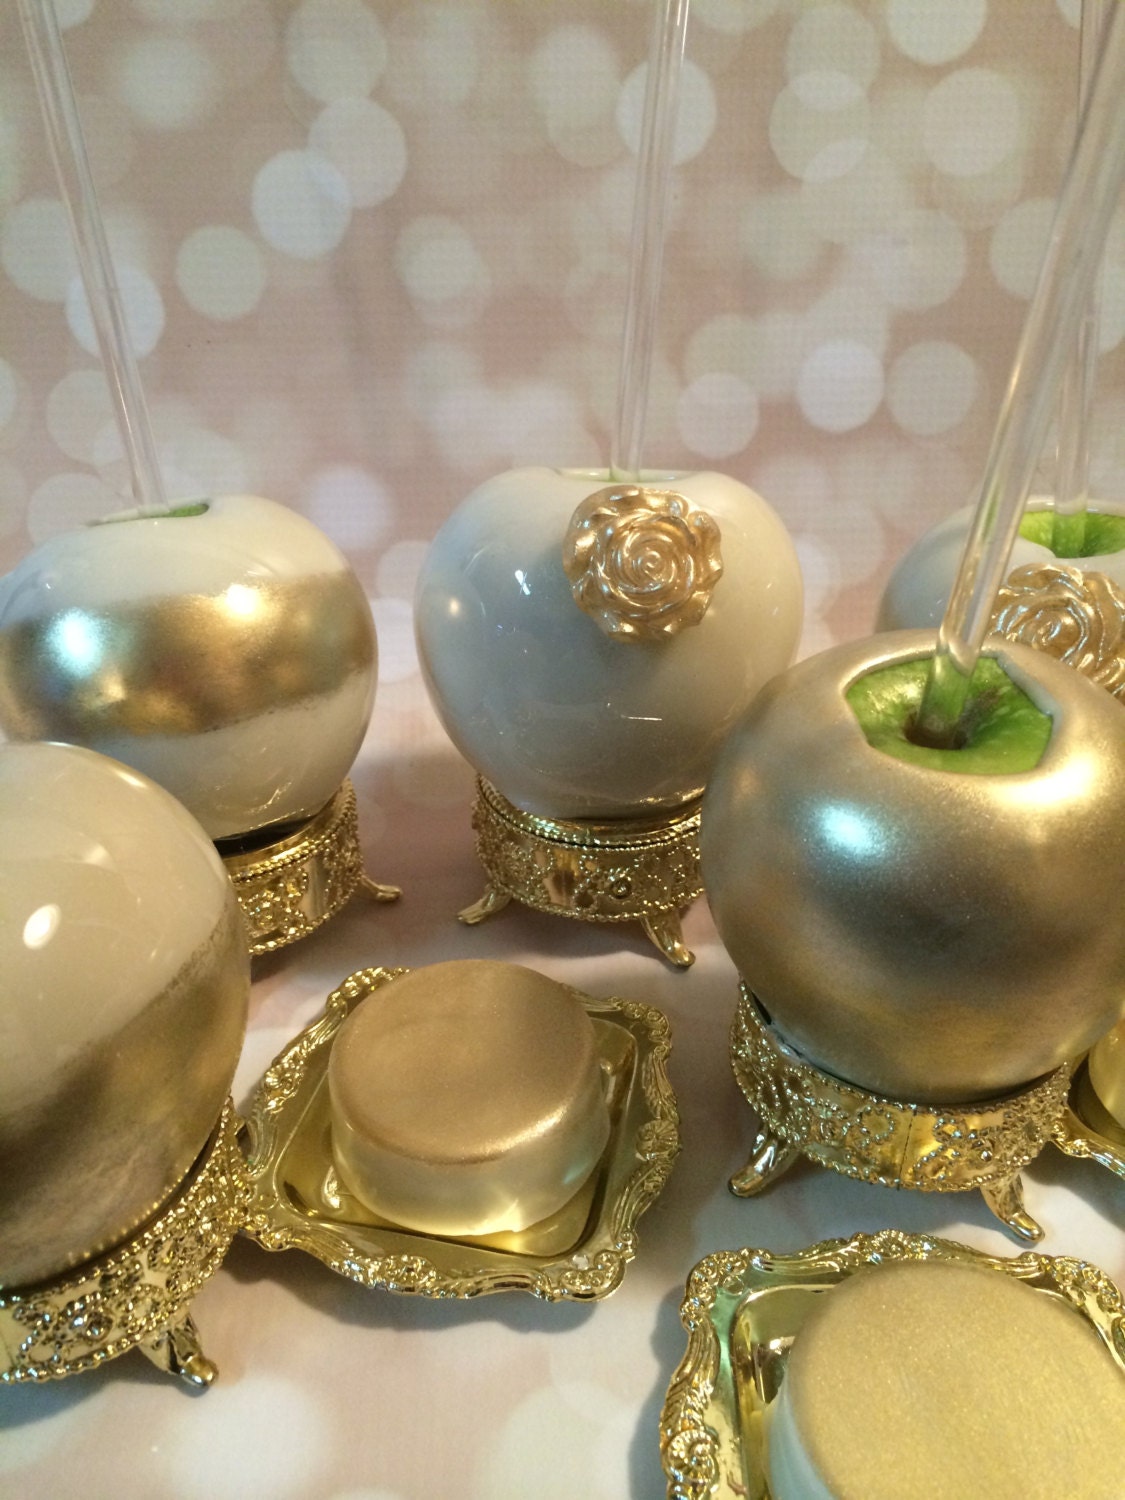 Candy apples adorned with Gold or Silver. by KLDesserts on